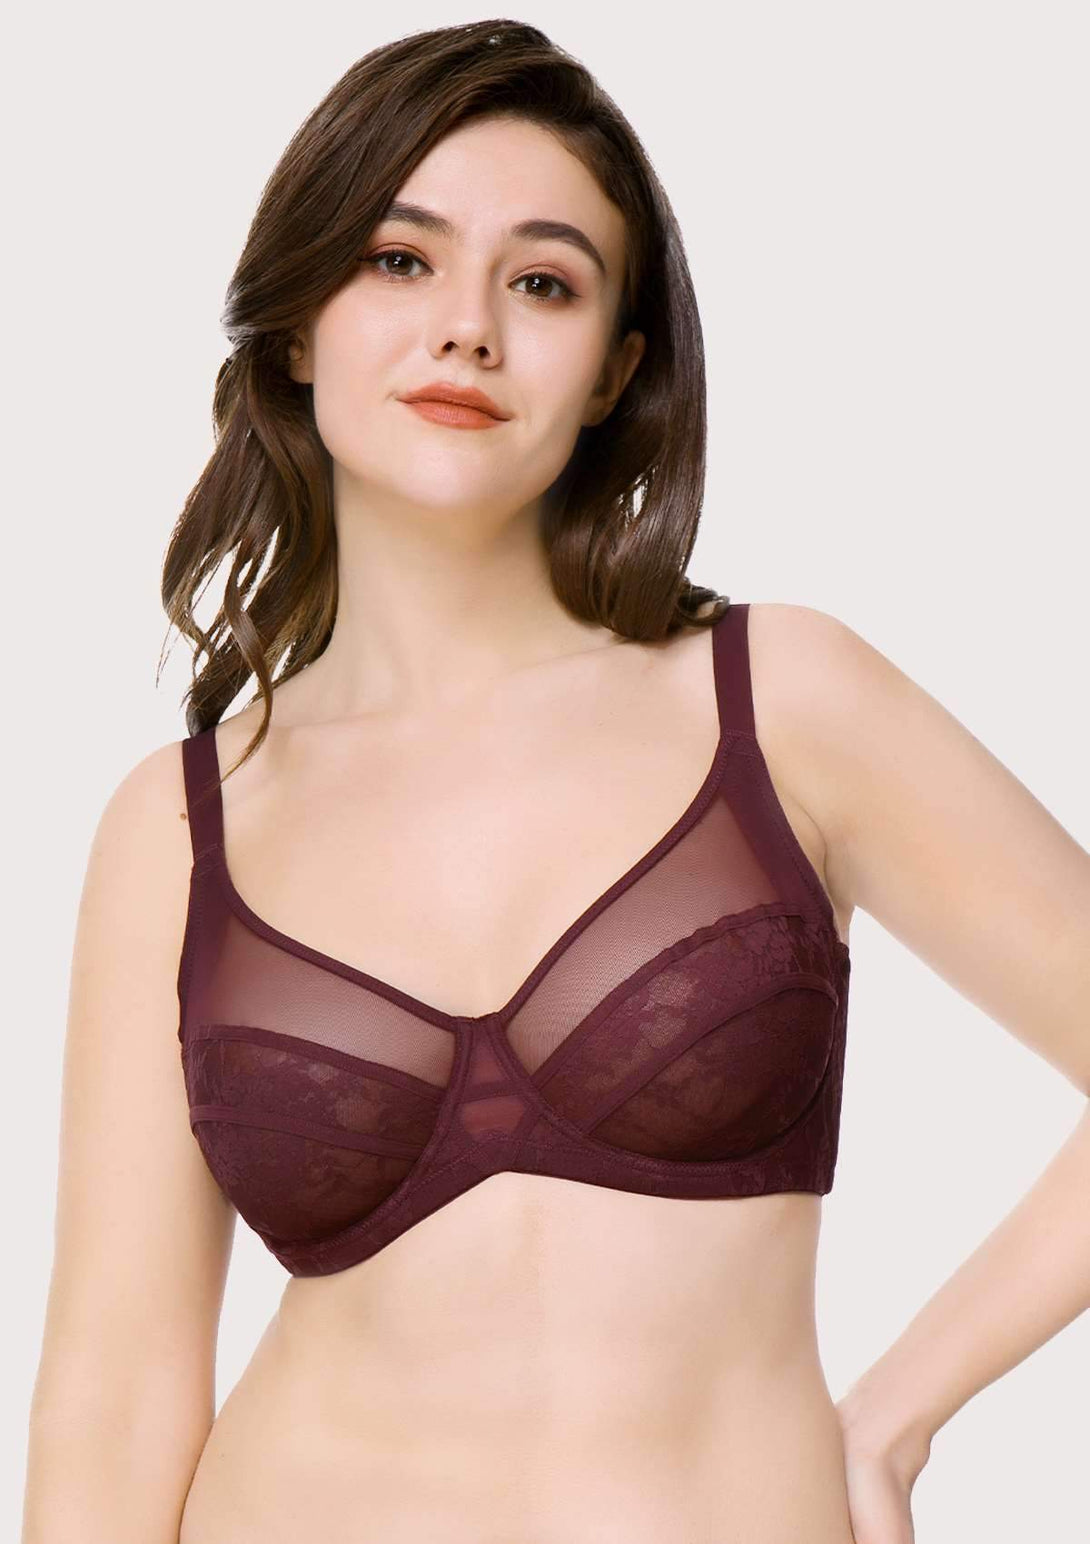 HSIA-EASTERBOGO Amour Sheer Lace Unlined Bra Dark Red / 34C